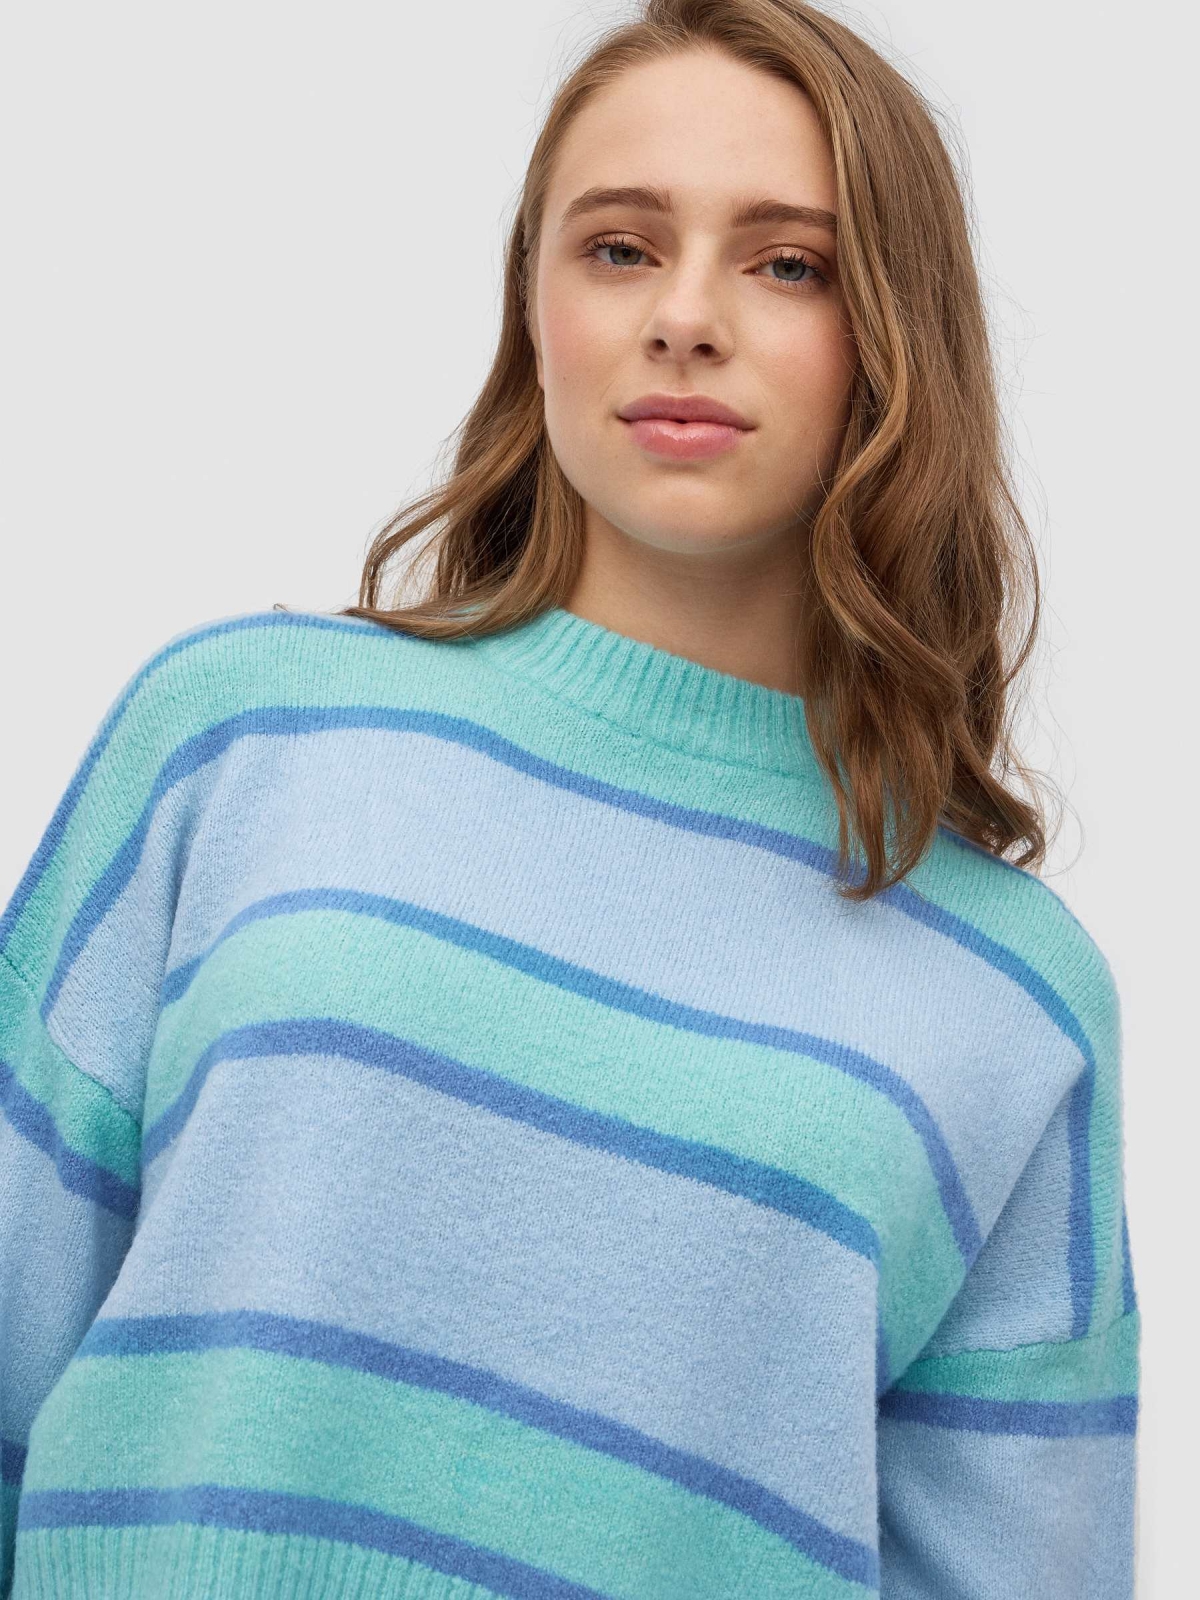 Oversized striped sweater light blue detail view